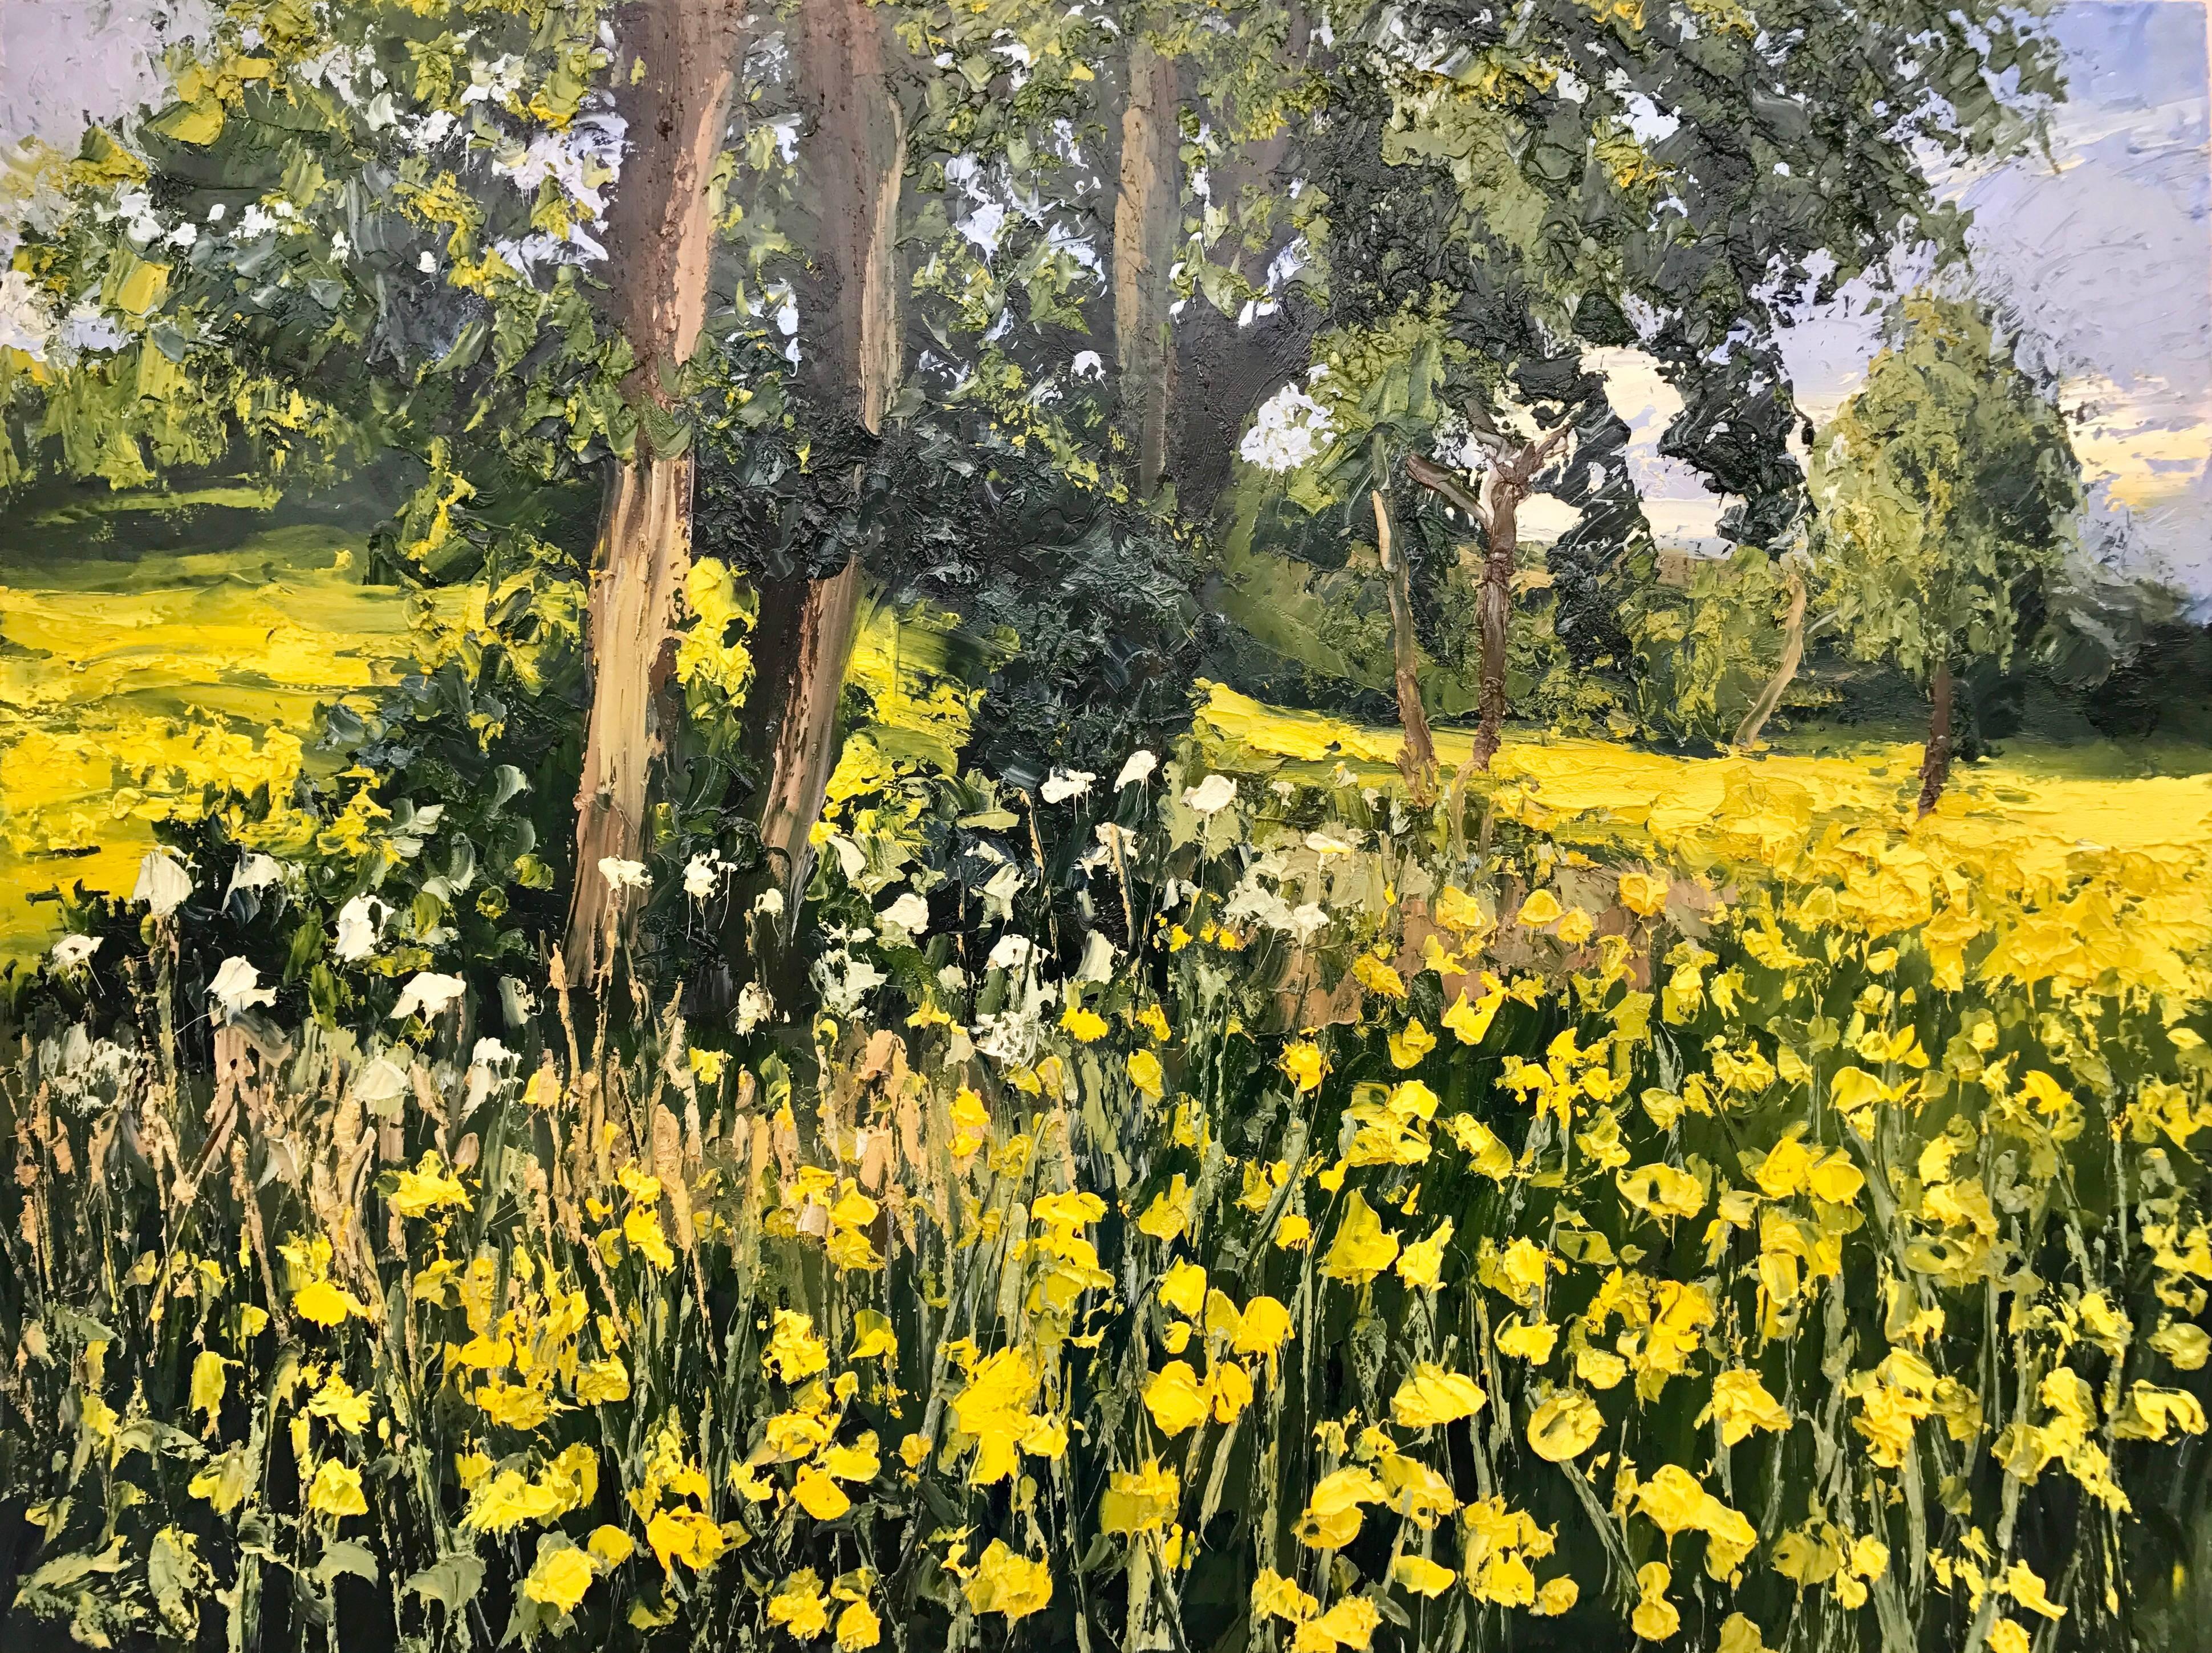 Colin Halliday Figurative Painting - Rapeseed Field Impasto Landscape Oil Painting by British En Plein Air Artist